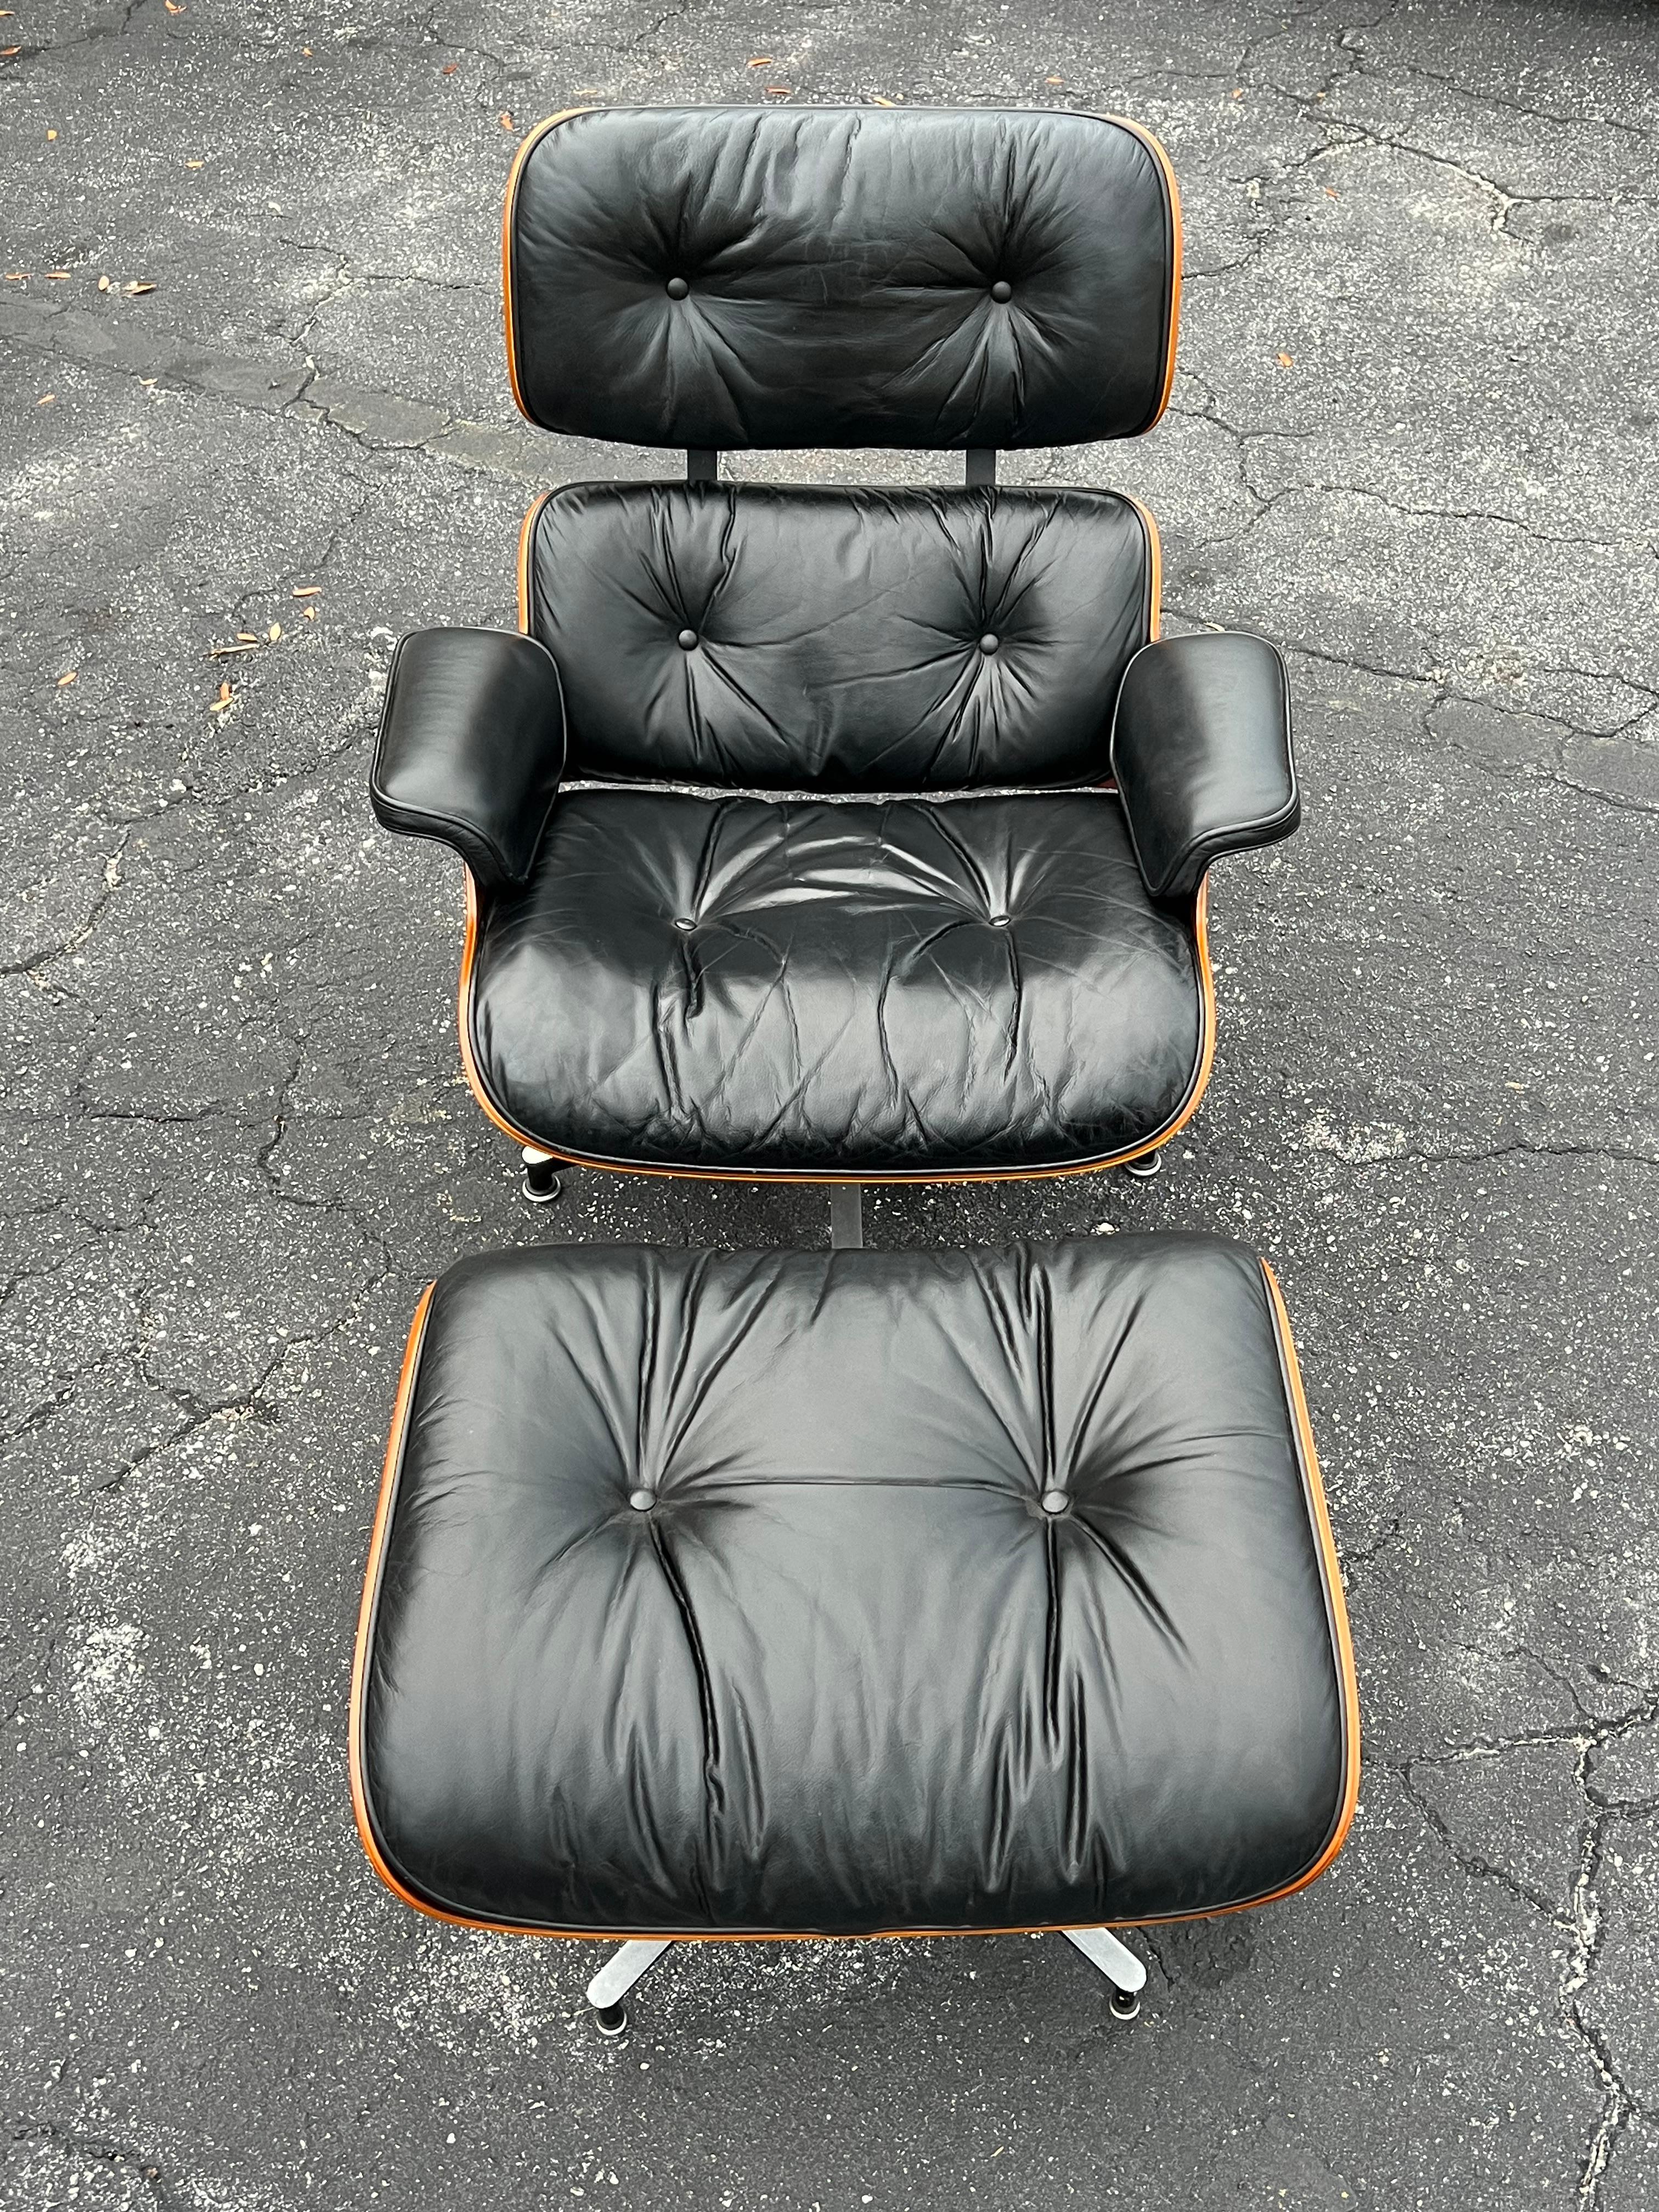 Classic Charles Eames Herman Miller Lounge Chair Black Leather 10